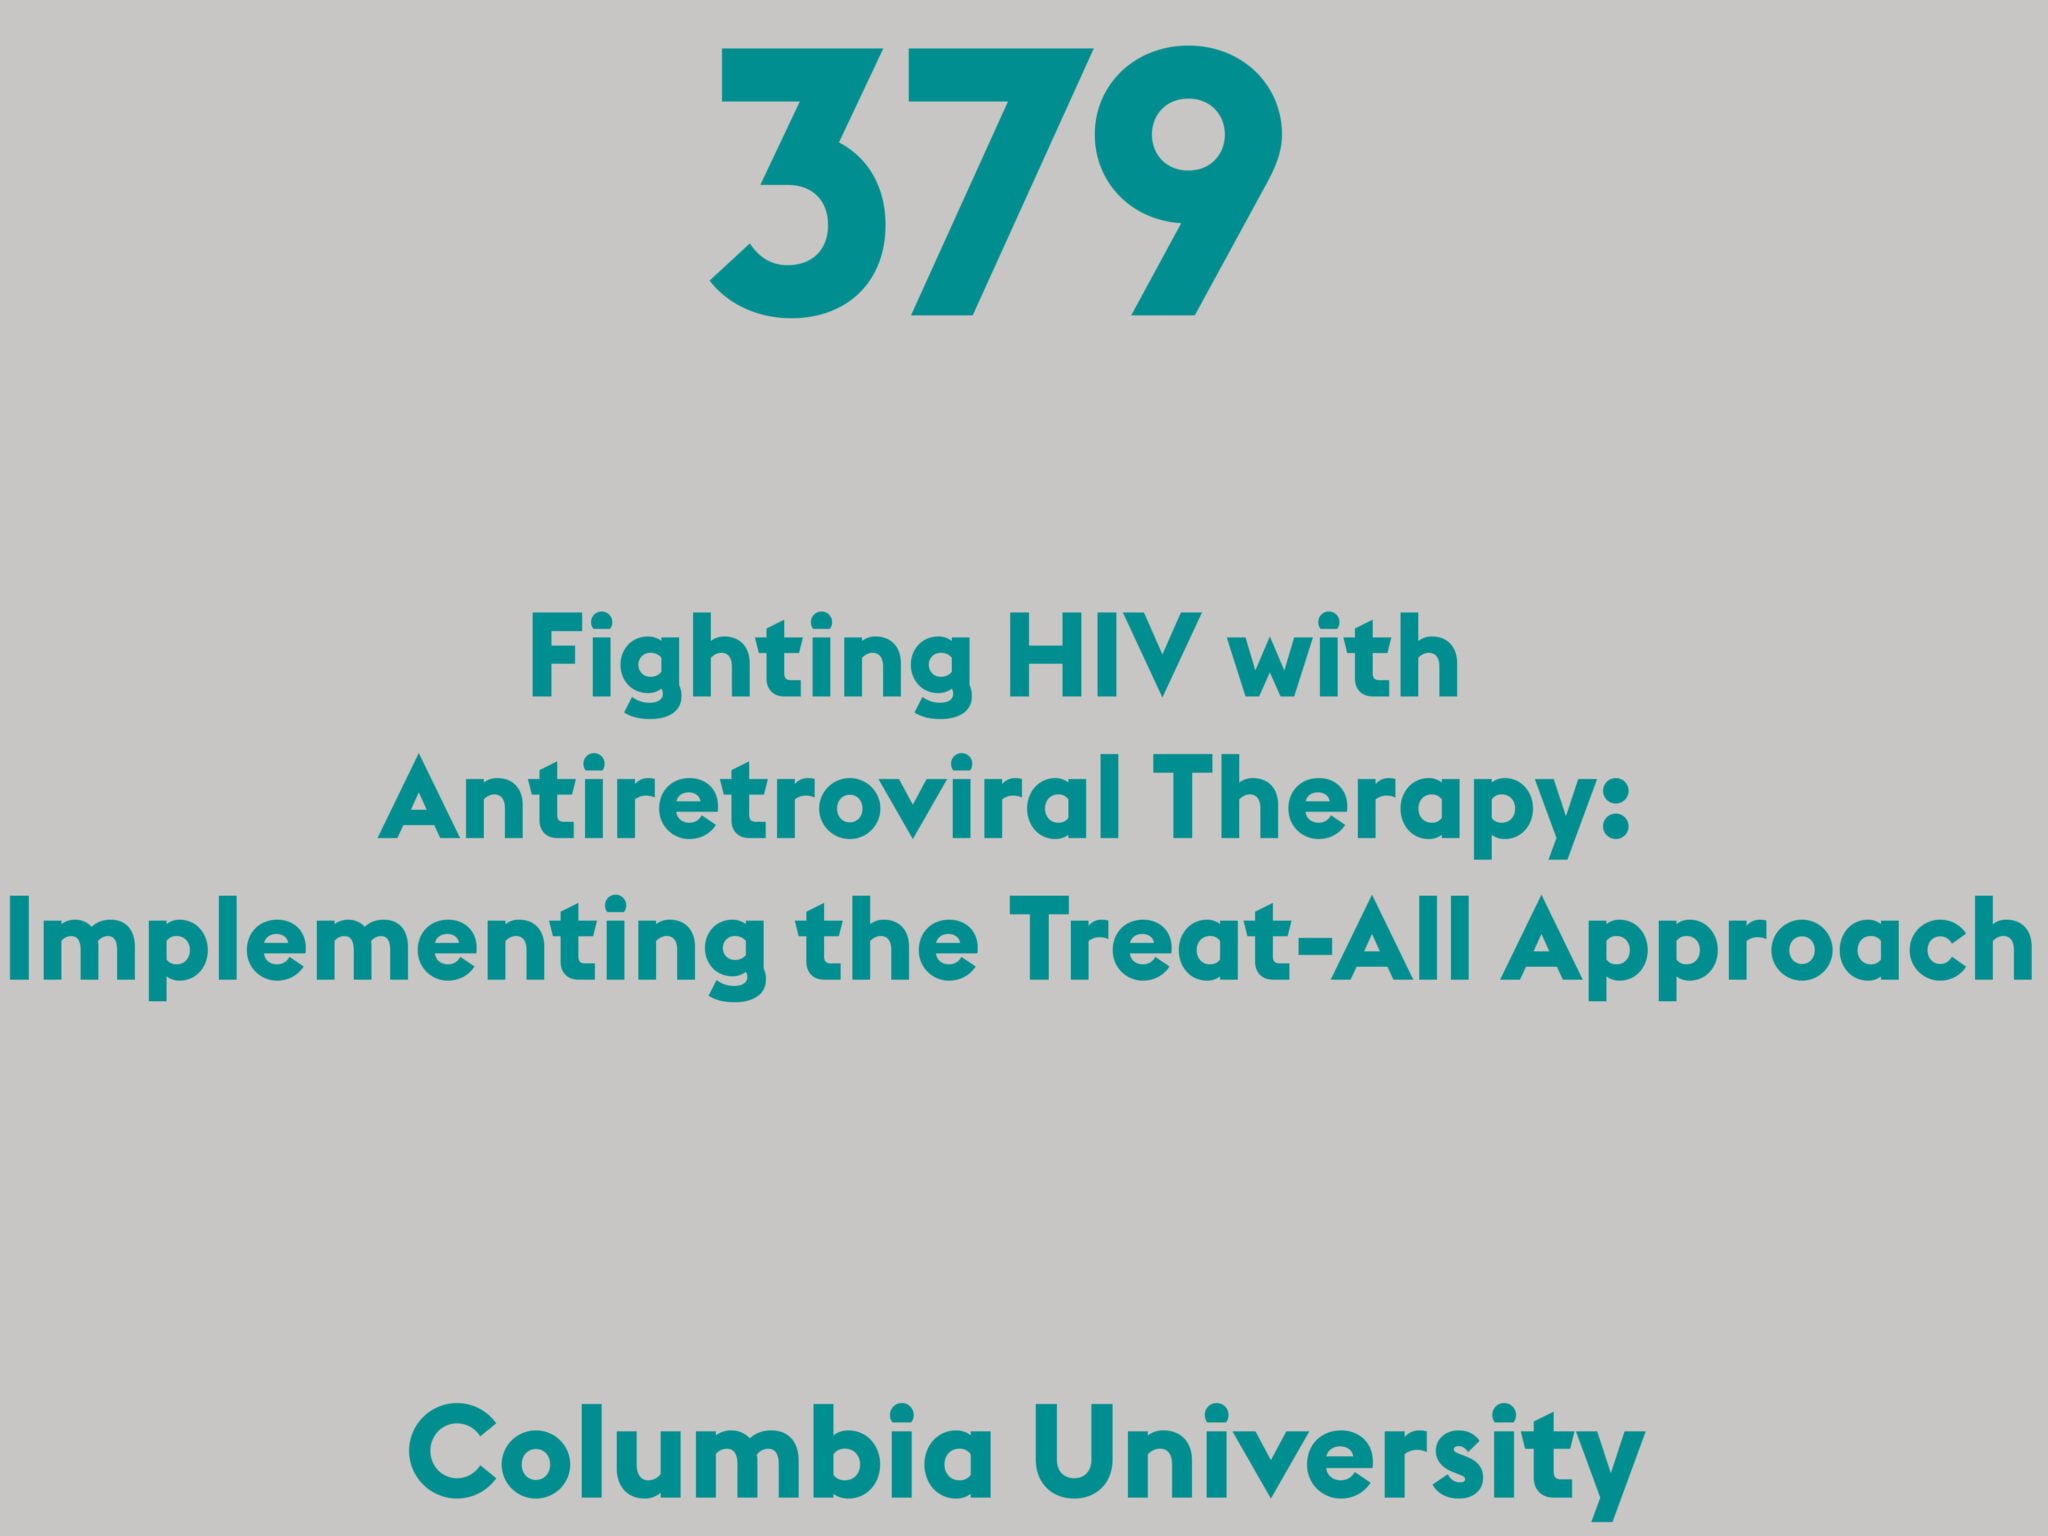 Fighting HIV with Antiretroviral Therapy: Implementing the Treat-All Approach